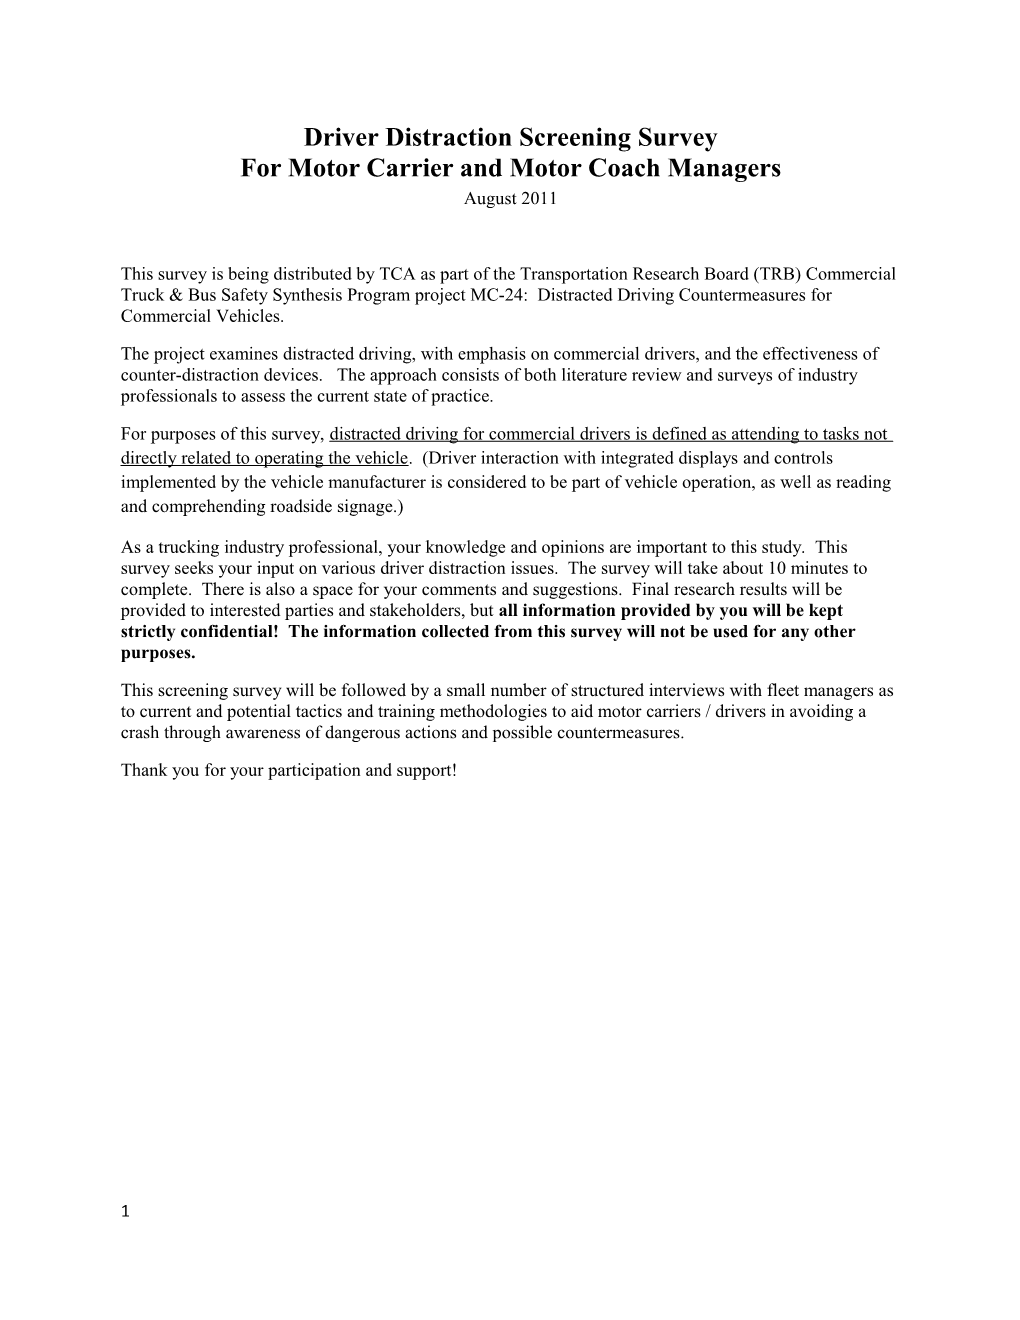 For Motor Carrier and Motor Coach Managers